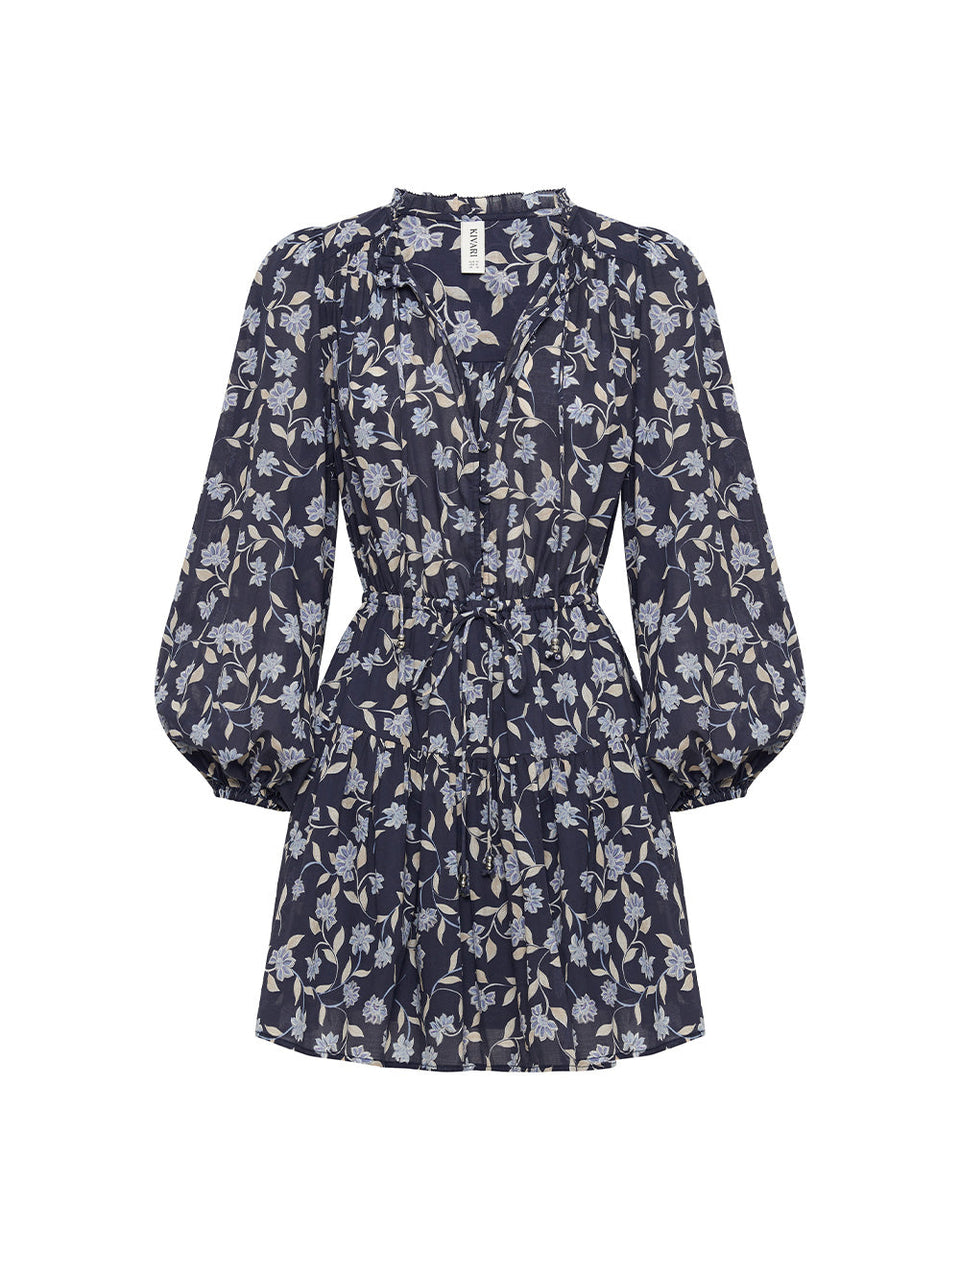 Ghost image of KIVARI Jeanne Mini Dress: A navy and sky blue floral dress made from cotton and featuring a button front, elasticated waist tie, full-length blouson sleeves and frill collar detail.